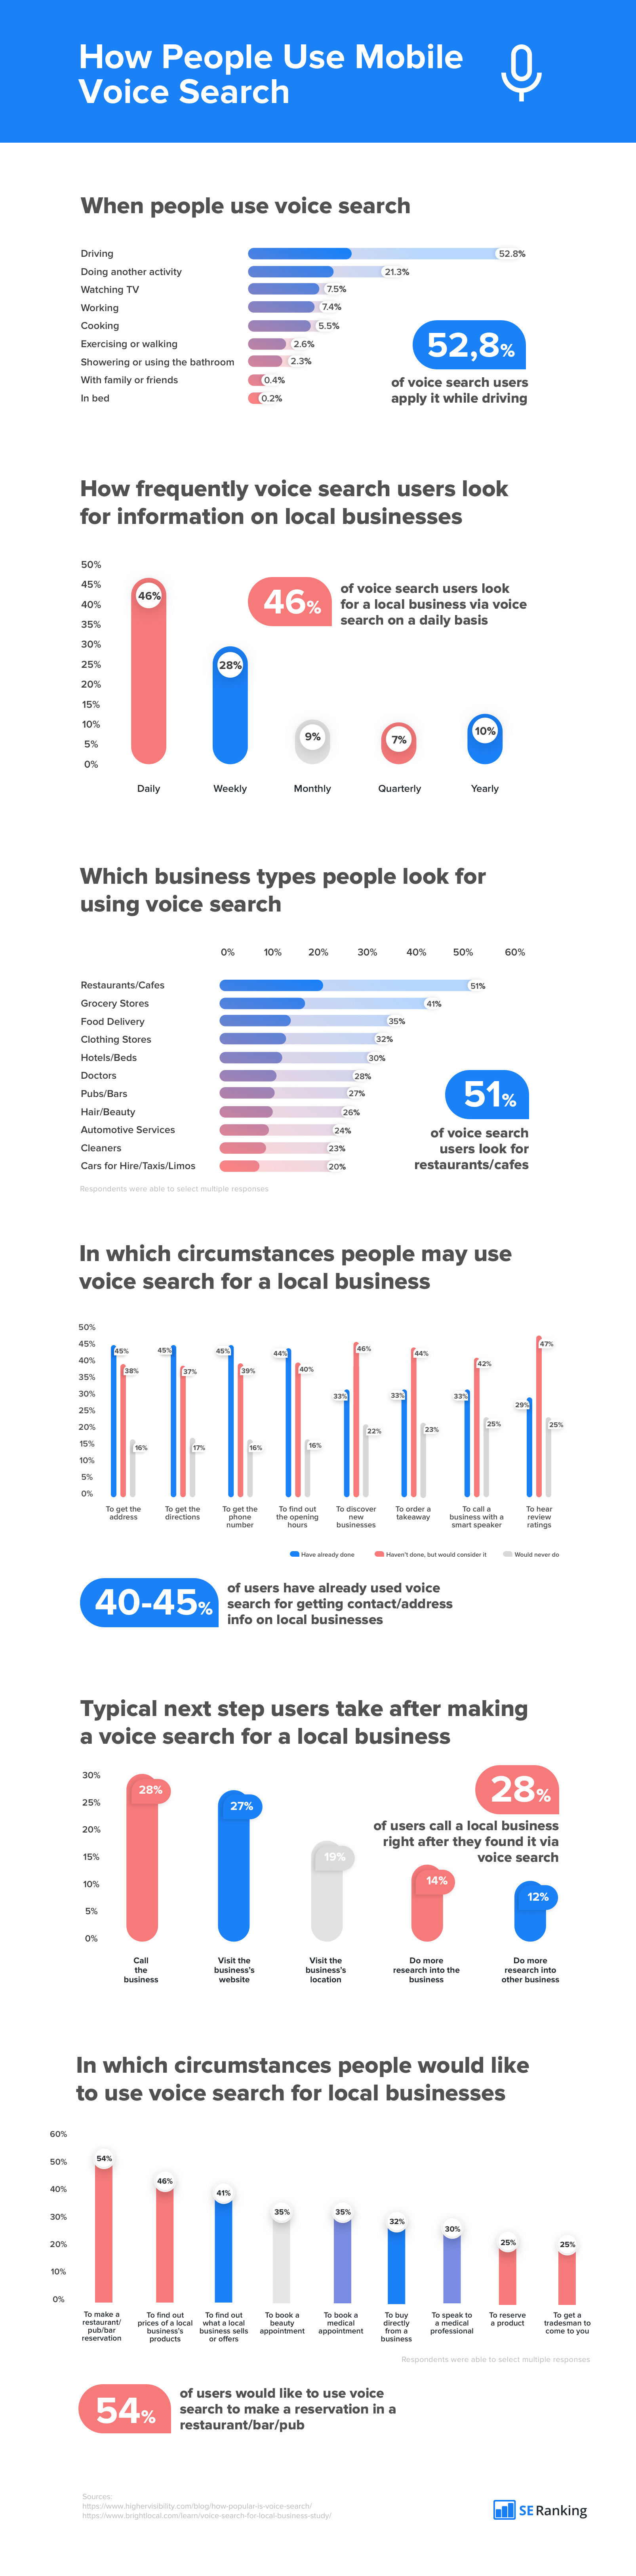 How People Use Mobile Voice Search